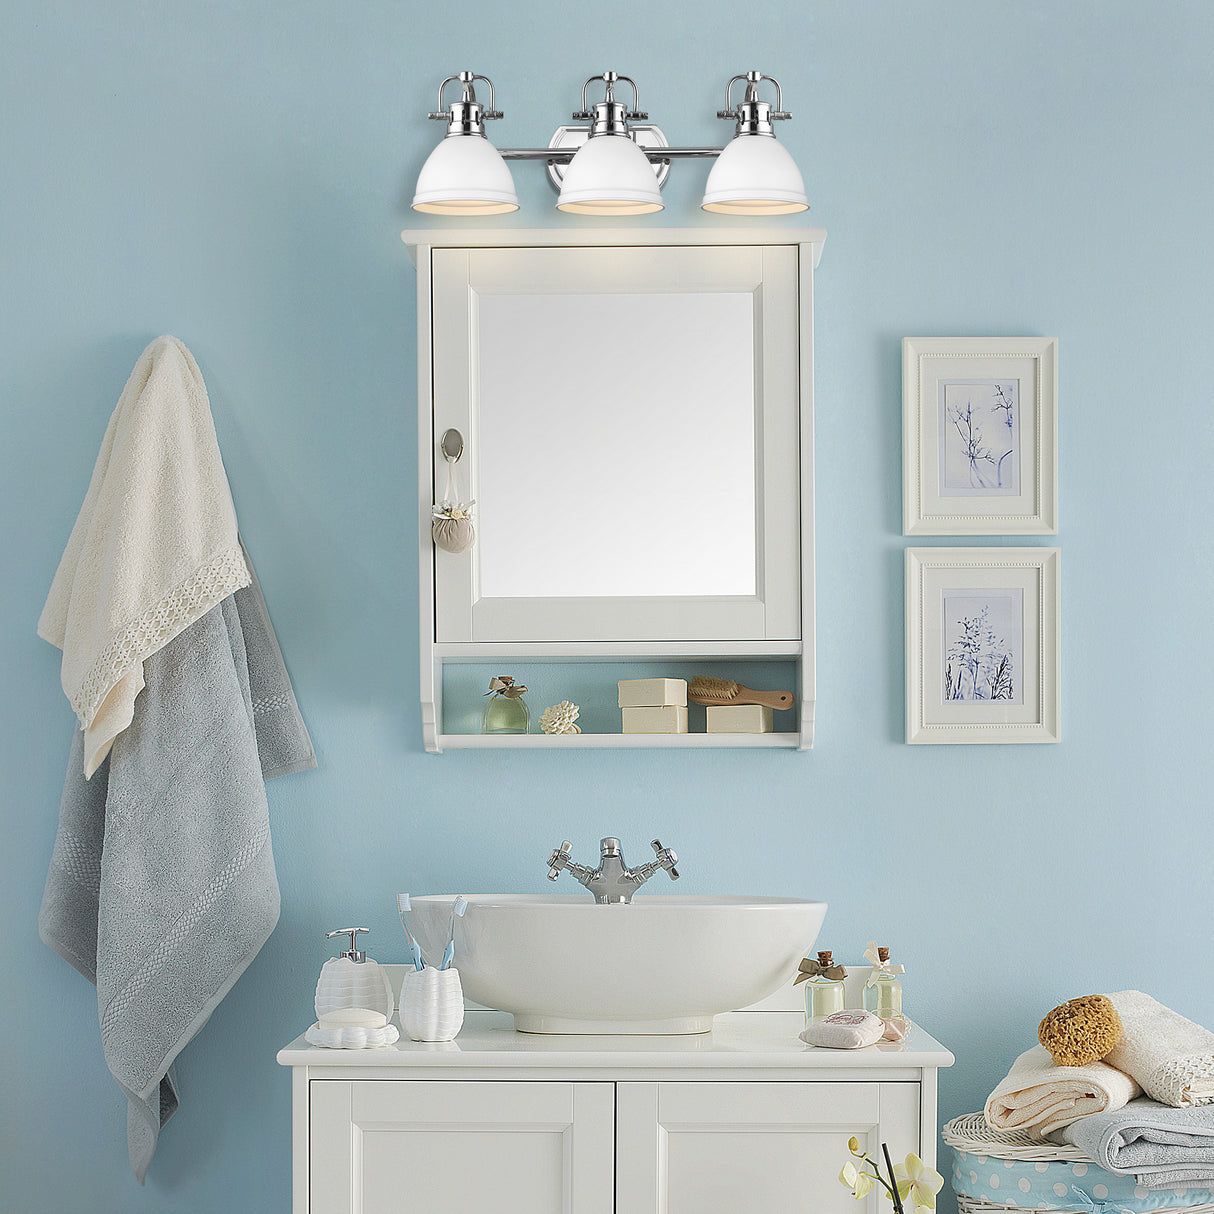 Duncan 3 Light Bath Vanity in Chrome with a Matte White Shade